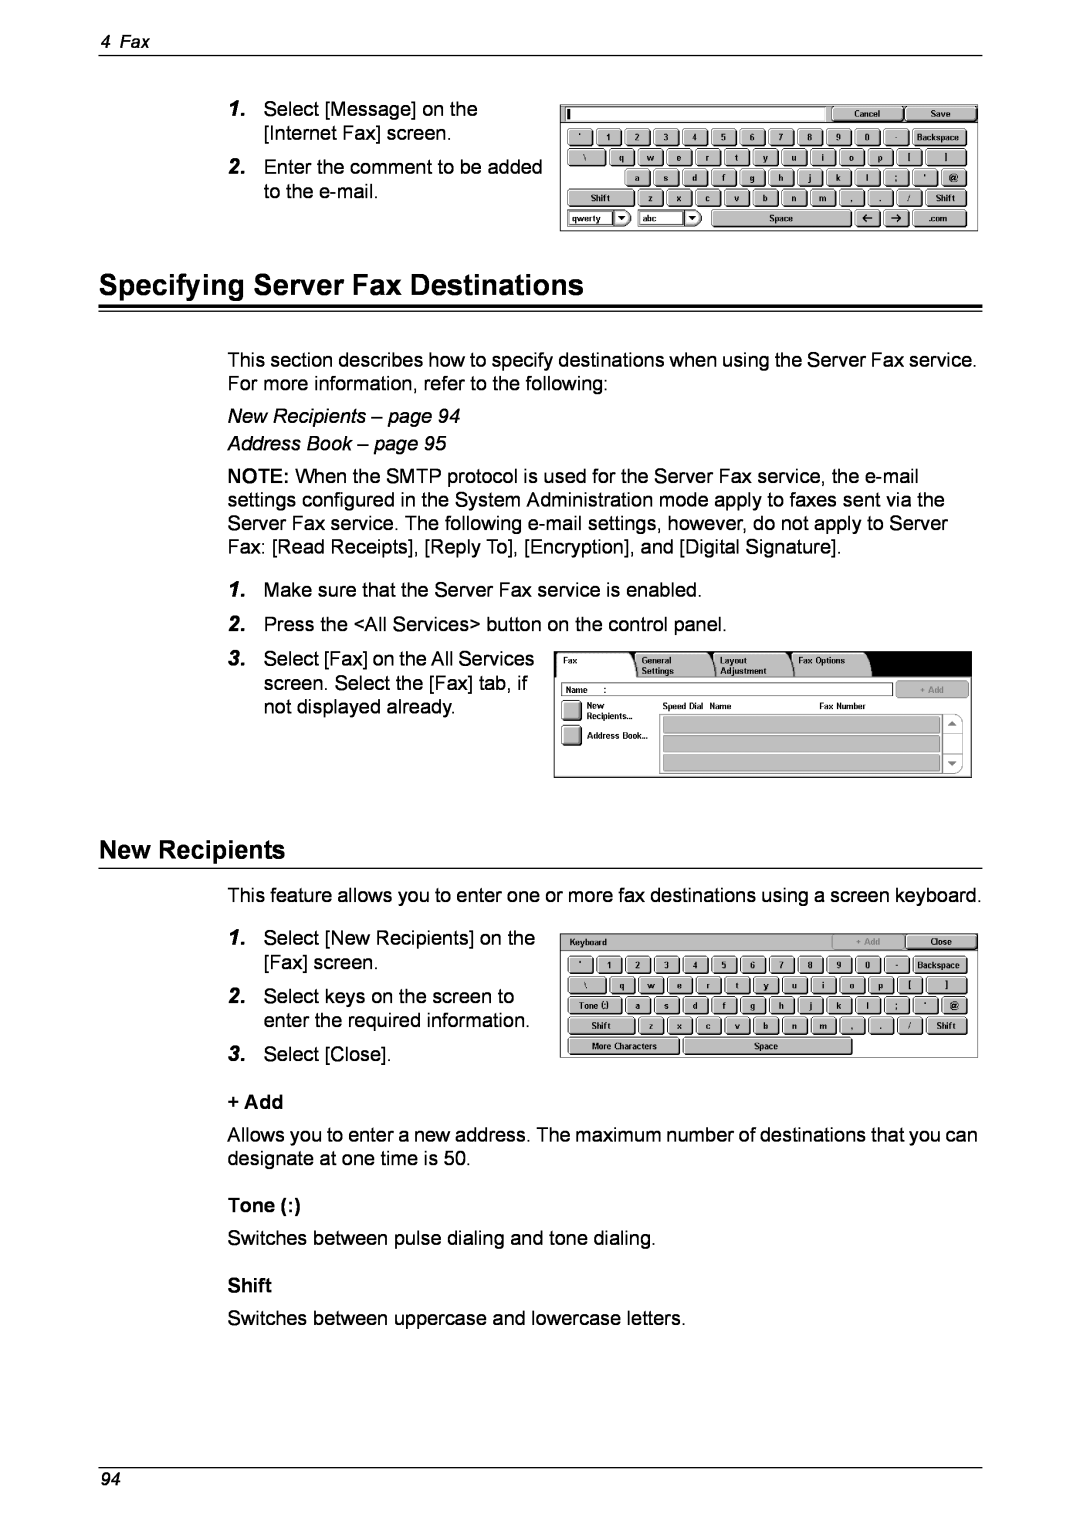 Xerox 5230 manual Specifying Server Fax Destinations, New Recipients – page Address Book – page, + Add, Tone, Shift 